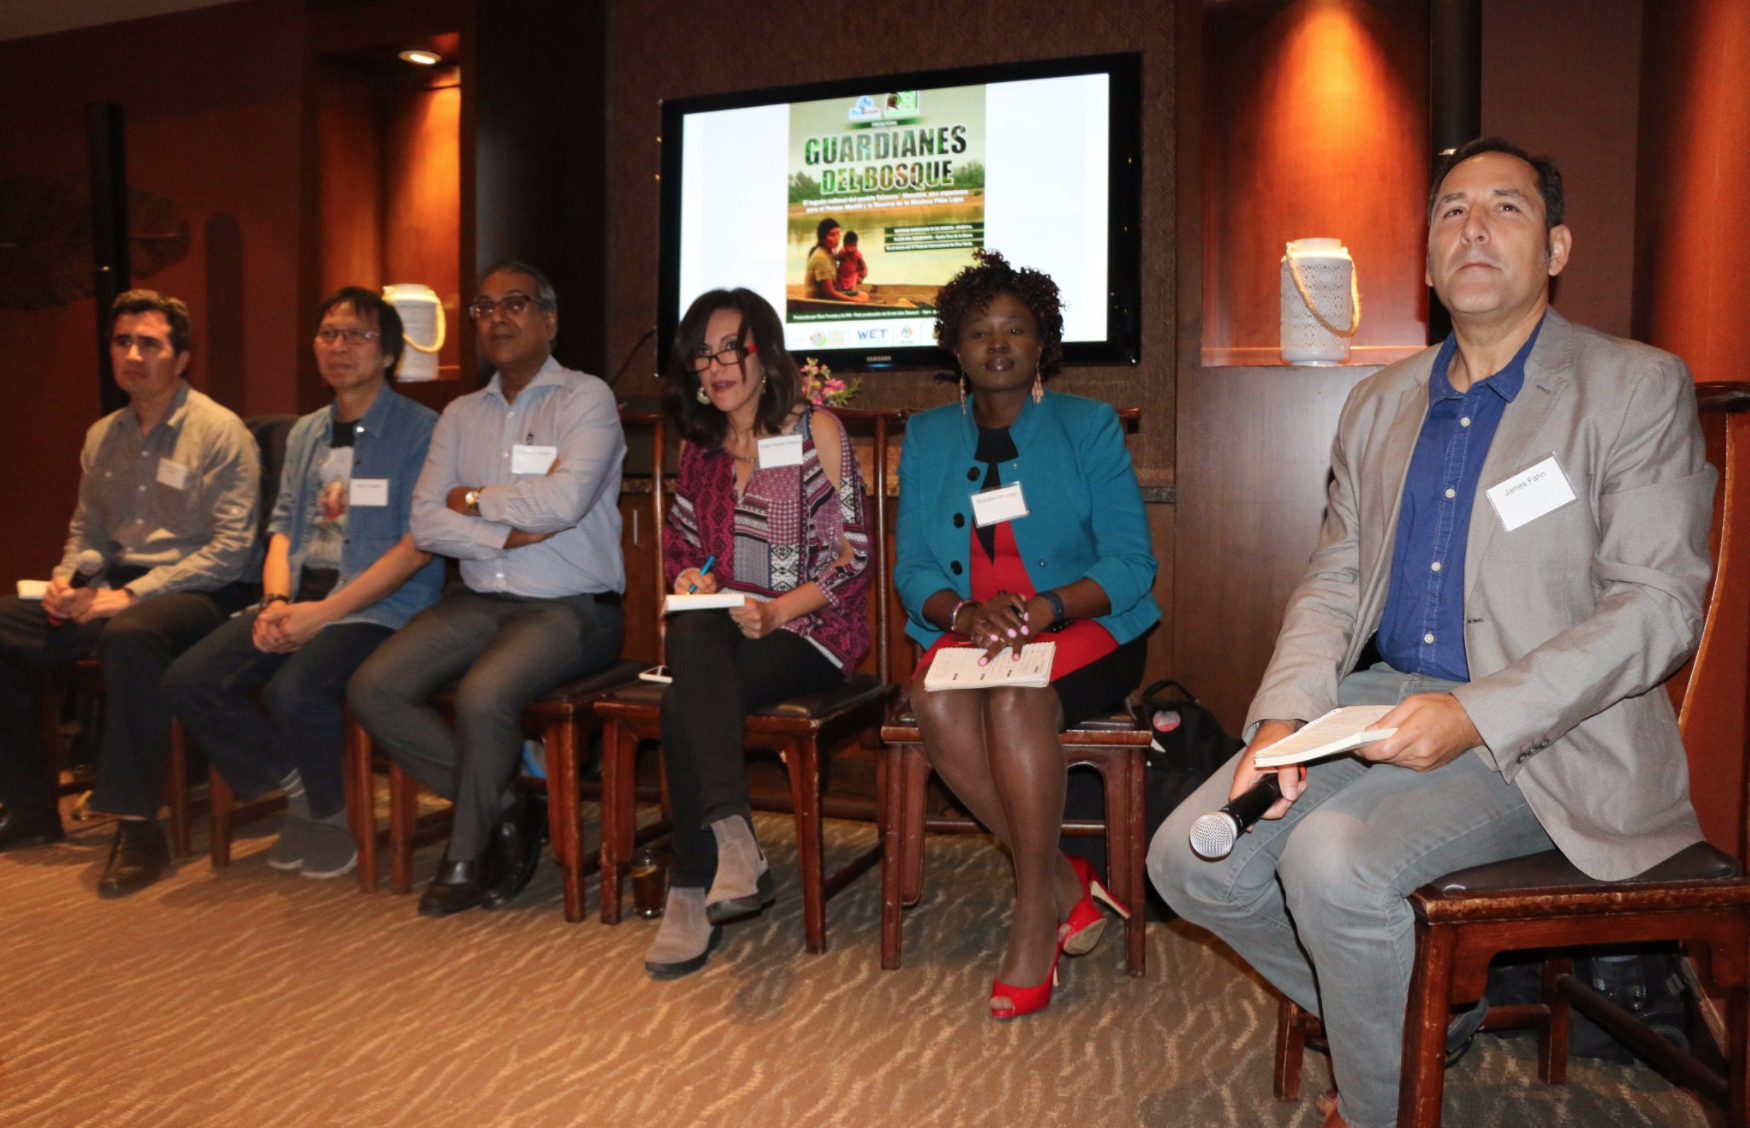 EJN journalists discuss climate coverage challenges at San Francisco event